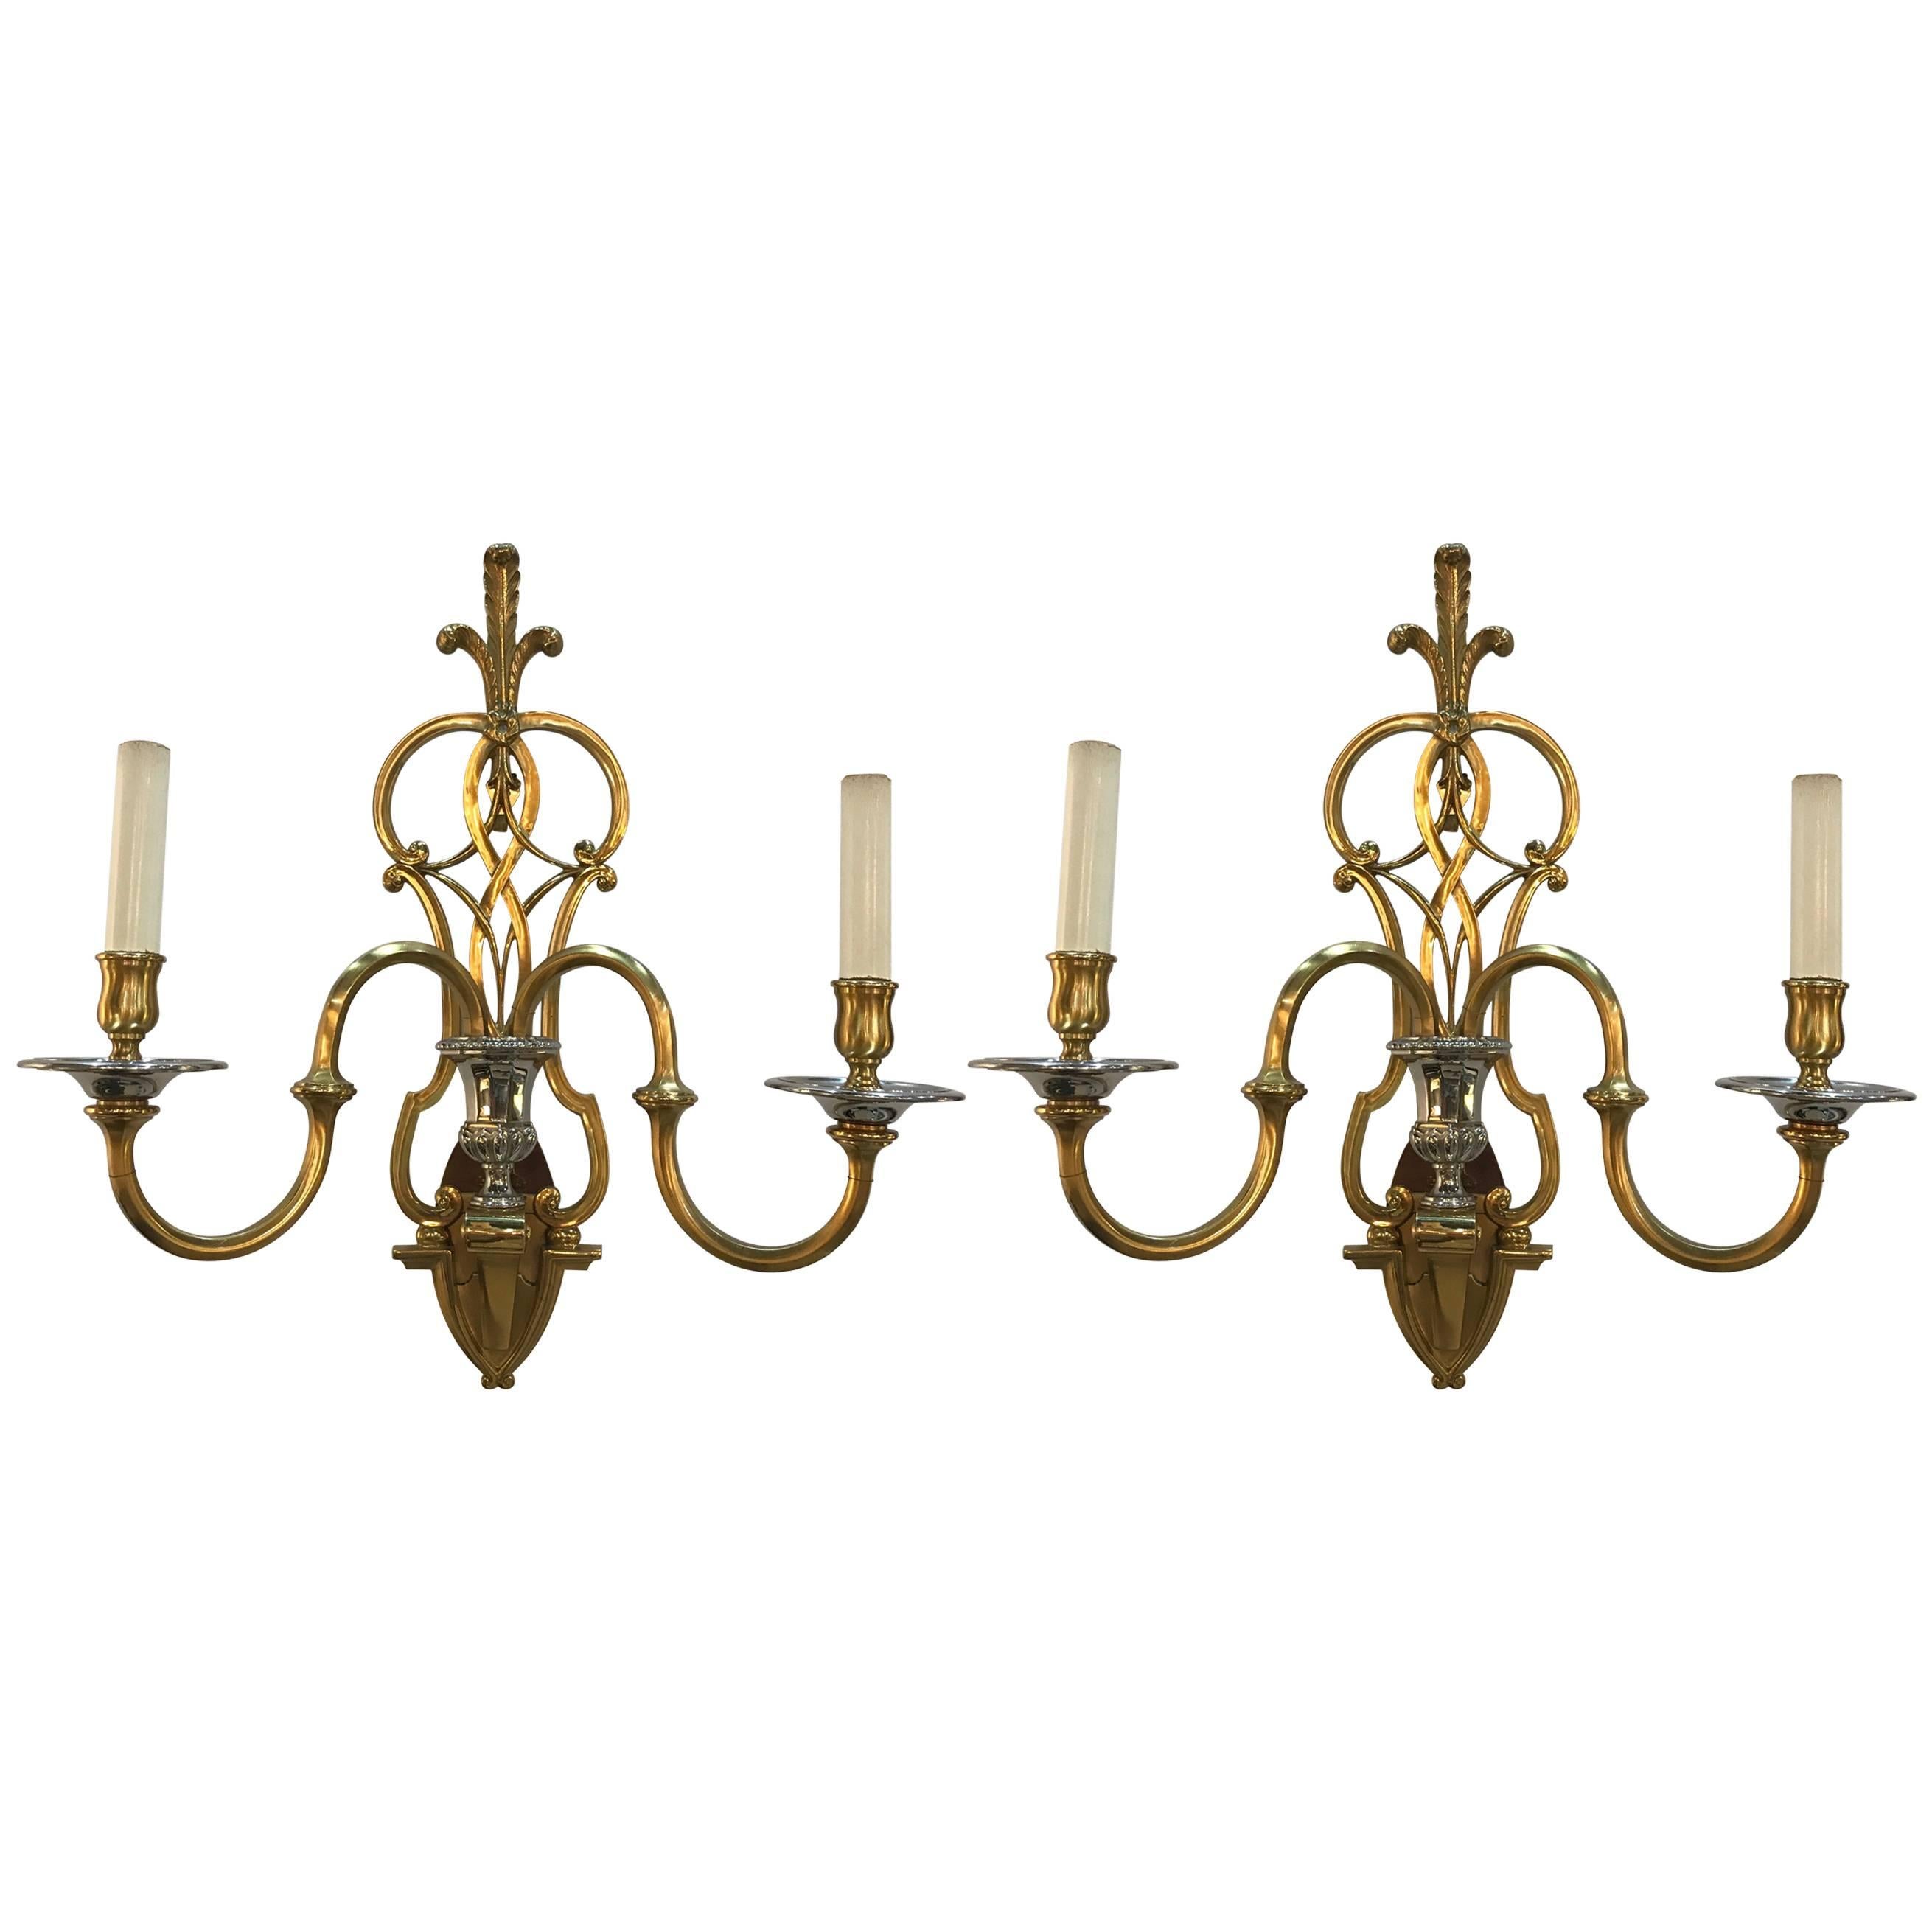 Fabulous Pair of Brass and Nickel 2 light Wall Sconces